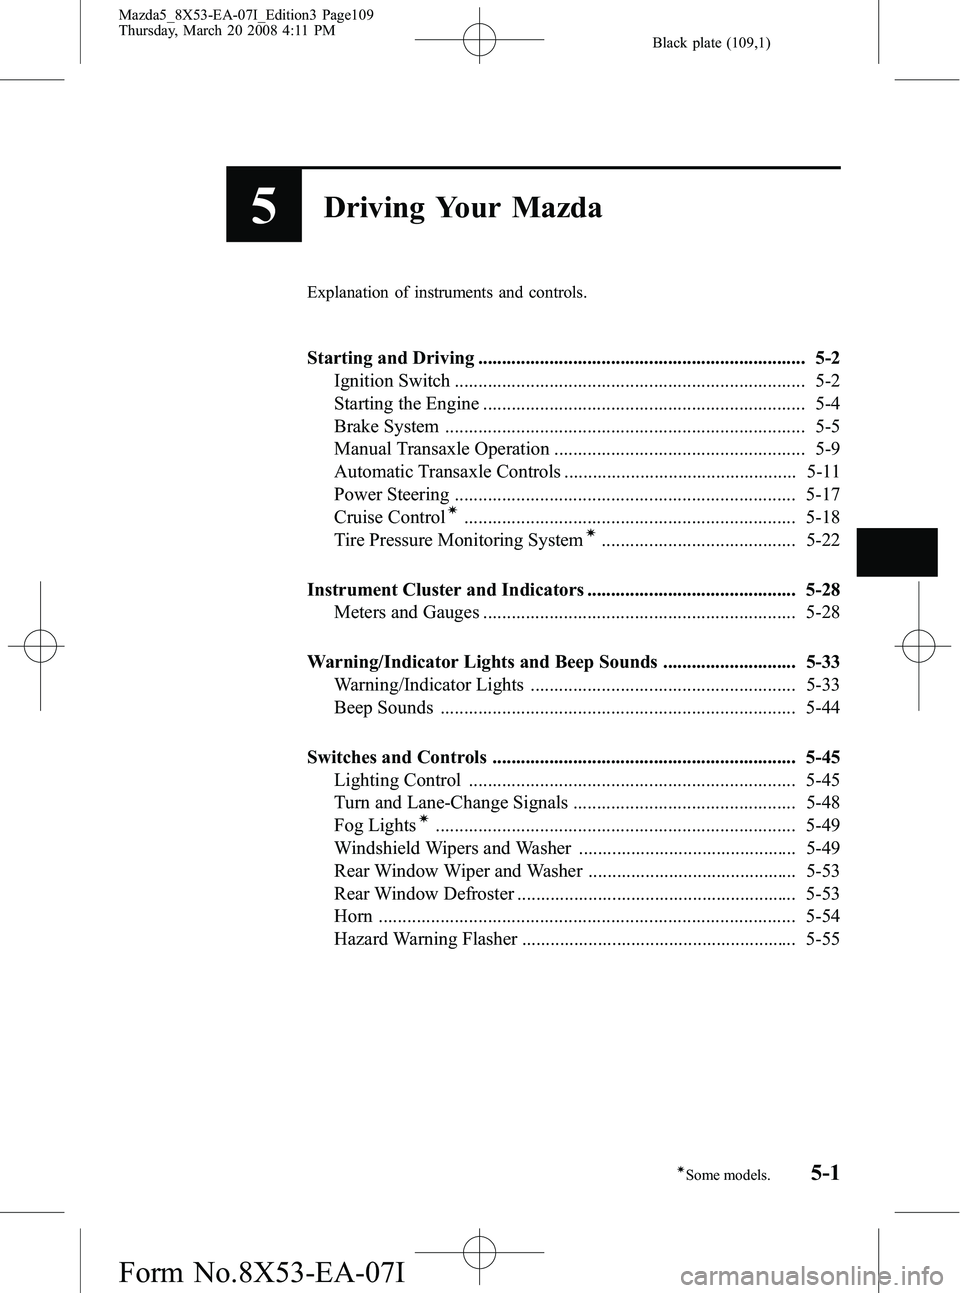 MAZDA MODEL 5 2008  Owners Manual Black plate (109,1)
5Driving Your Mazda
Explanation of instruments and controls.
Starting and Driving ..................................................................... 5-2Ignition Switch .........